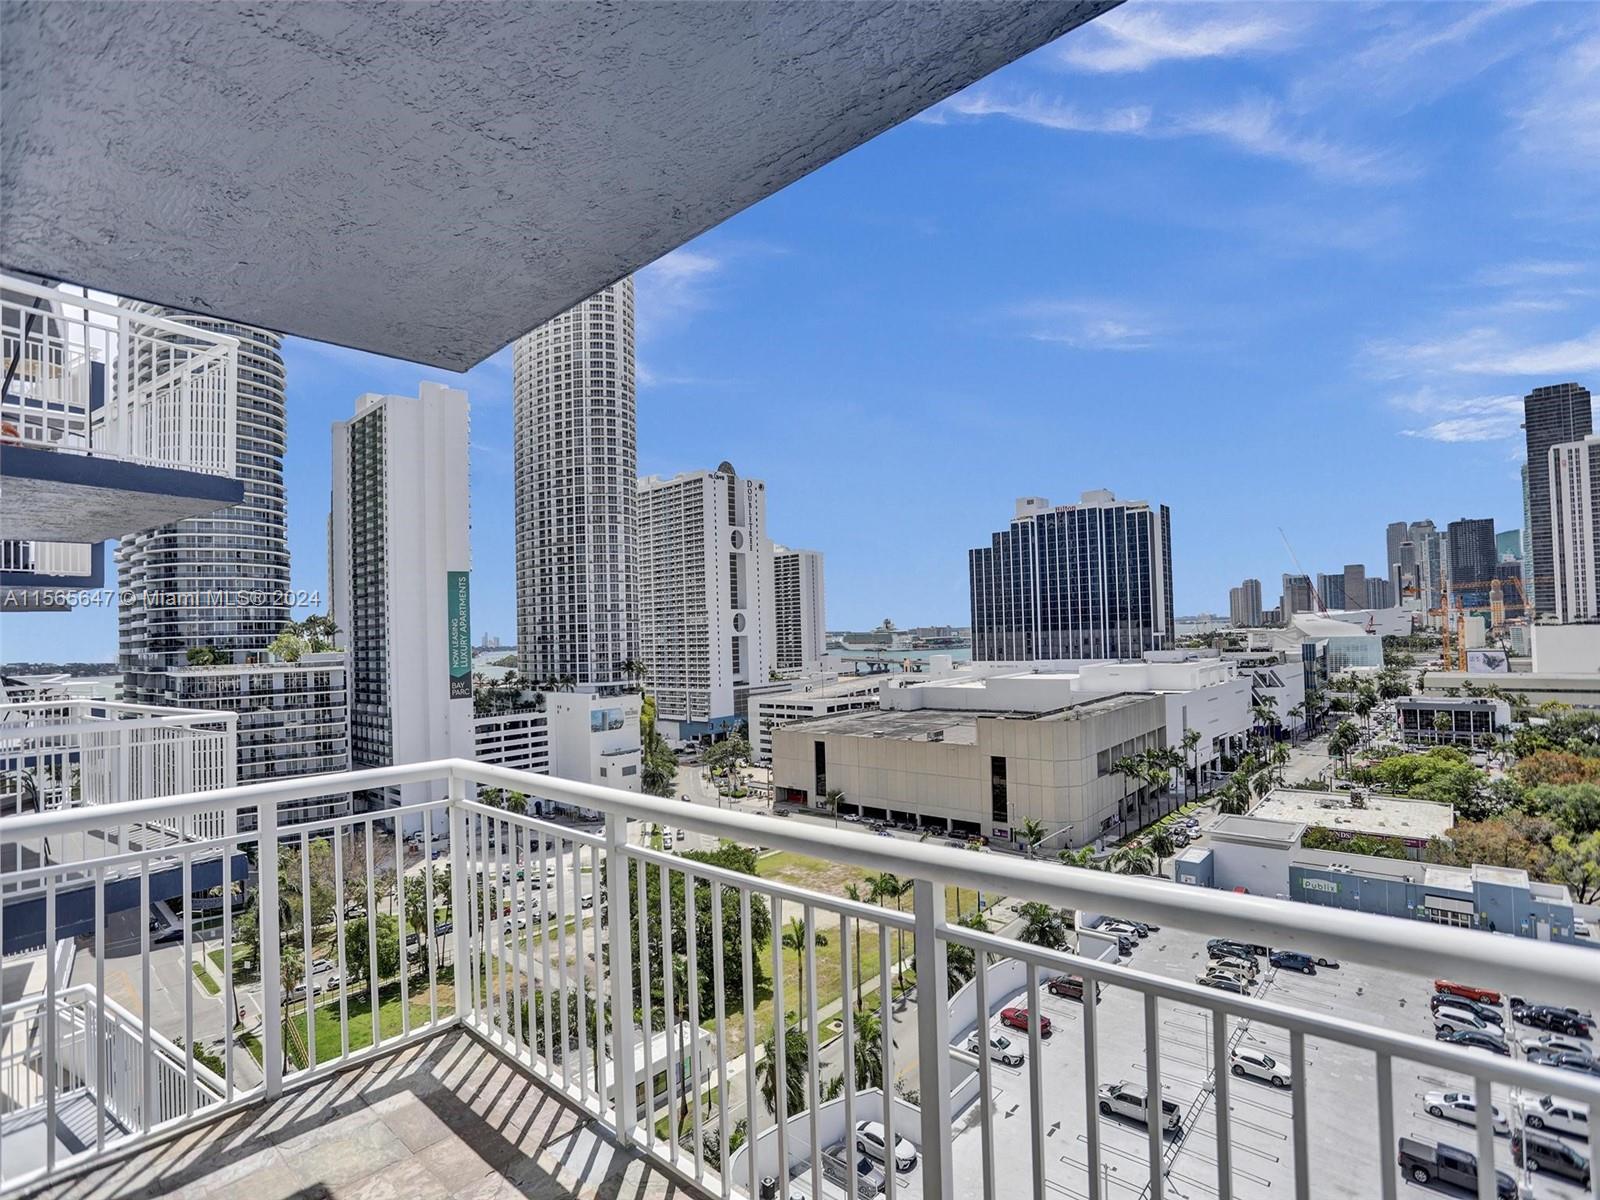 Stunning 2-bed/2-bath condo on Biscayne Blvd & 18th St. Sleek stainless steel appliances, washer/dryer, and 1 parking space. Steps from Publix, Art District, Kaseya Arena, and minutes to South Beach and Miami Airport. Urban luxury at its finest.